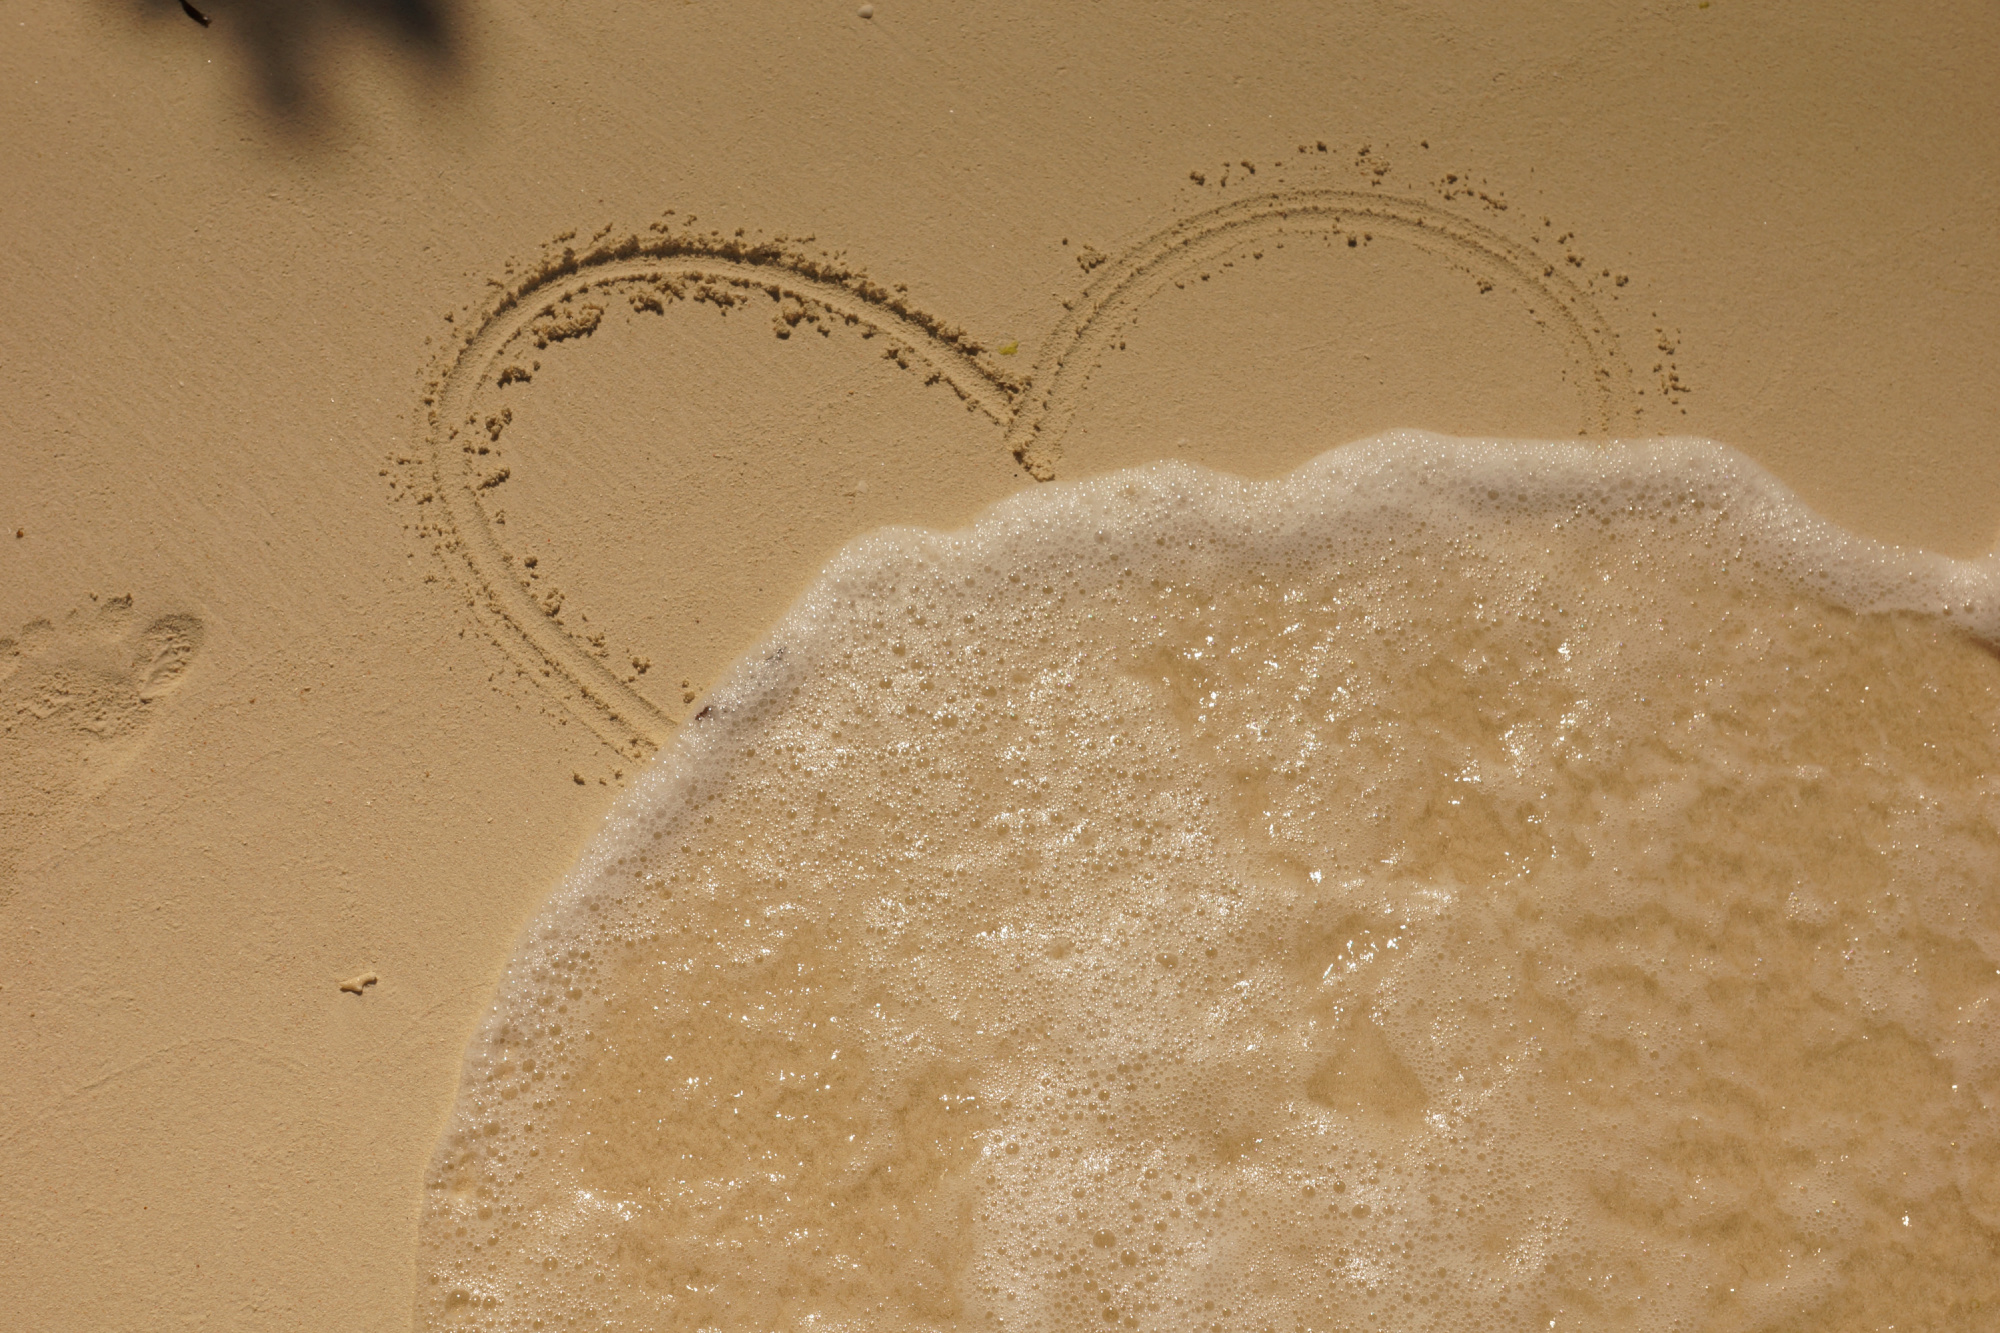 Wave washing over a heart carved in the sand.